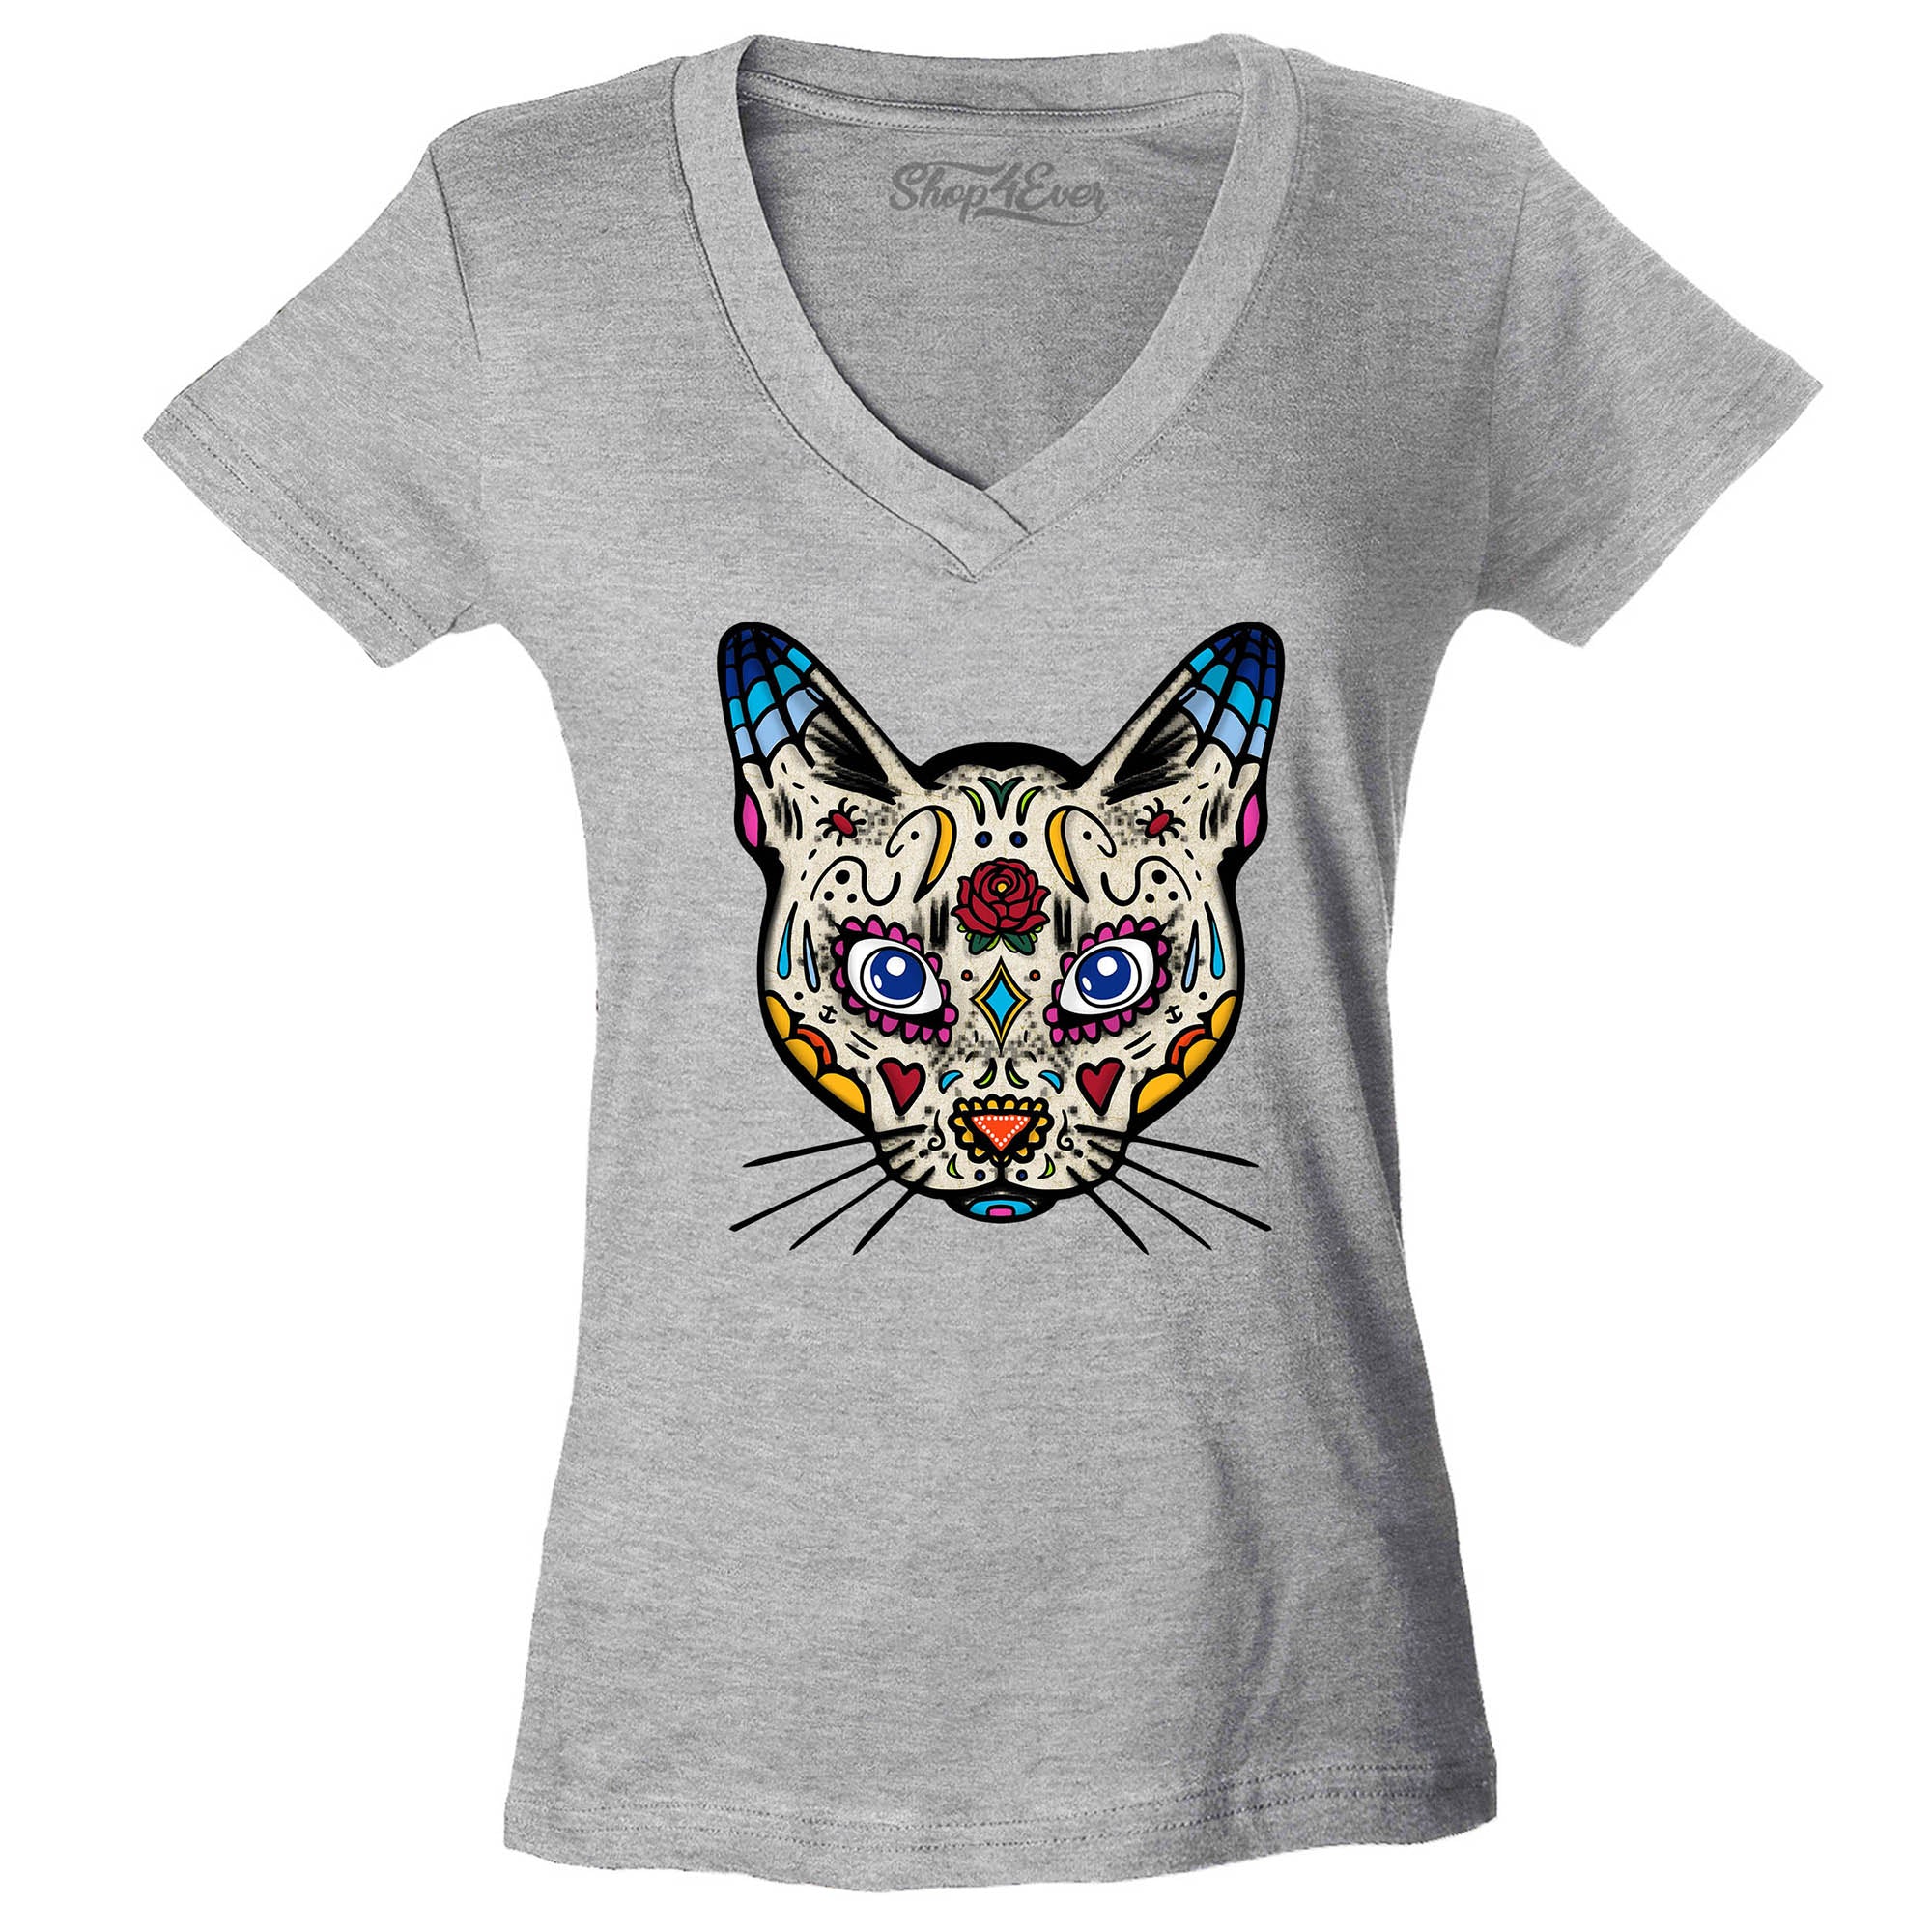 Day of The Dead Sugar Cat Women's V-Neck T-Shirt Slim Fit